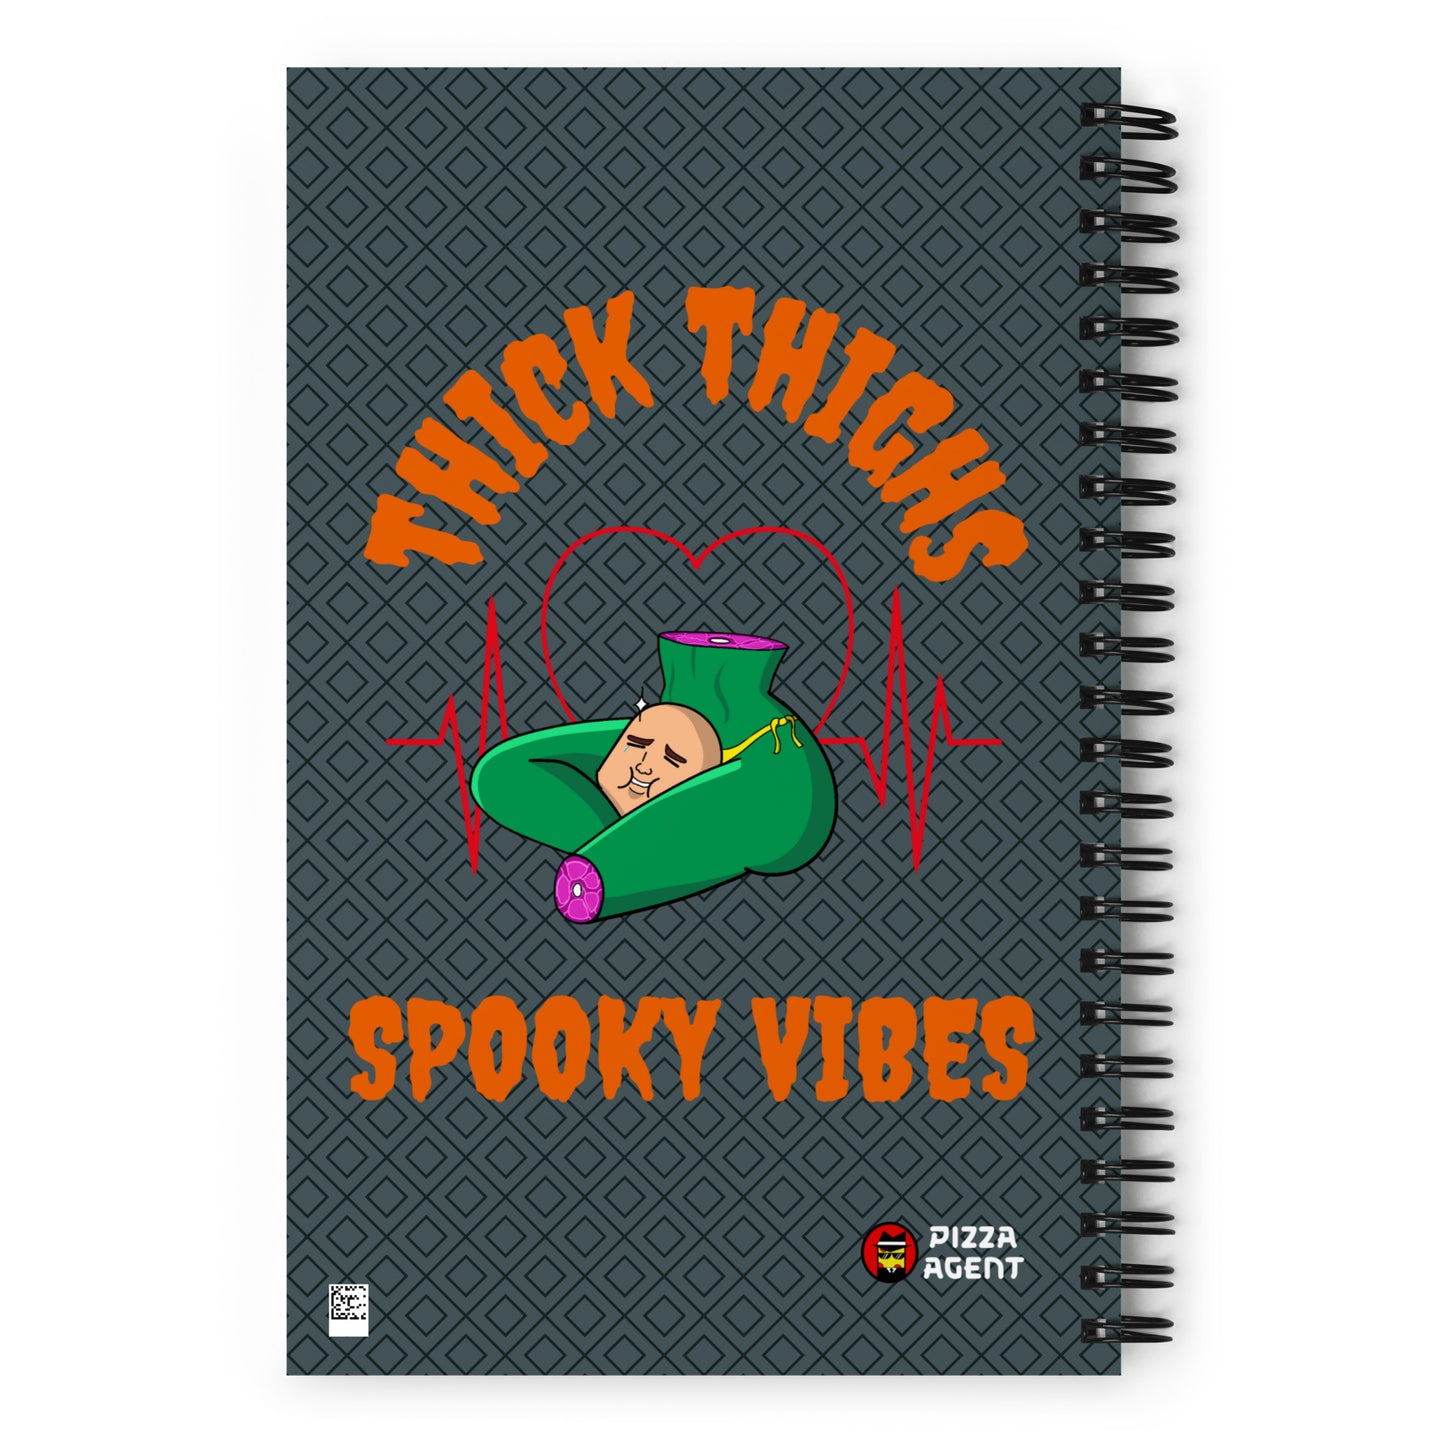 Thigh Thigs Spooky Vibes Spiral notebook